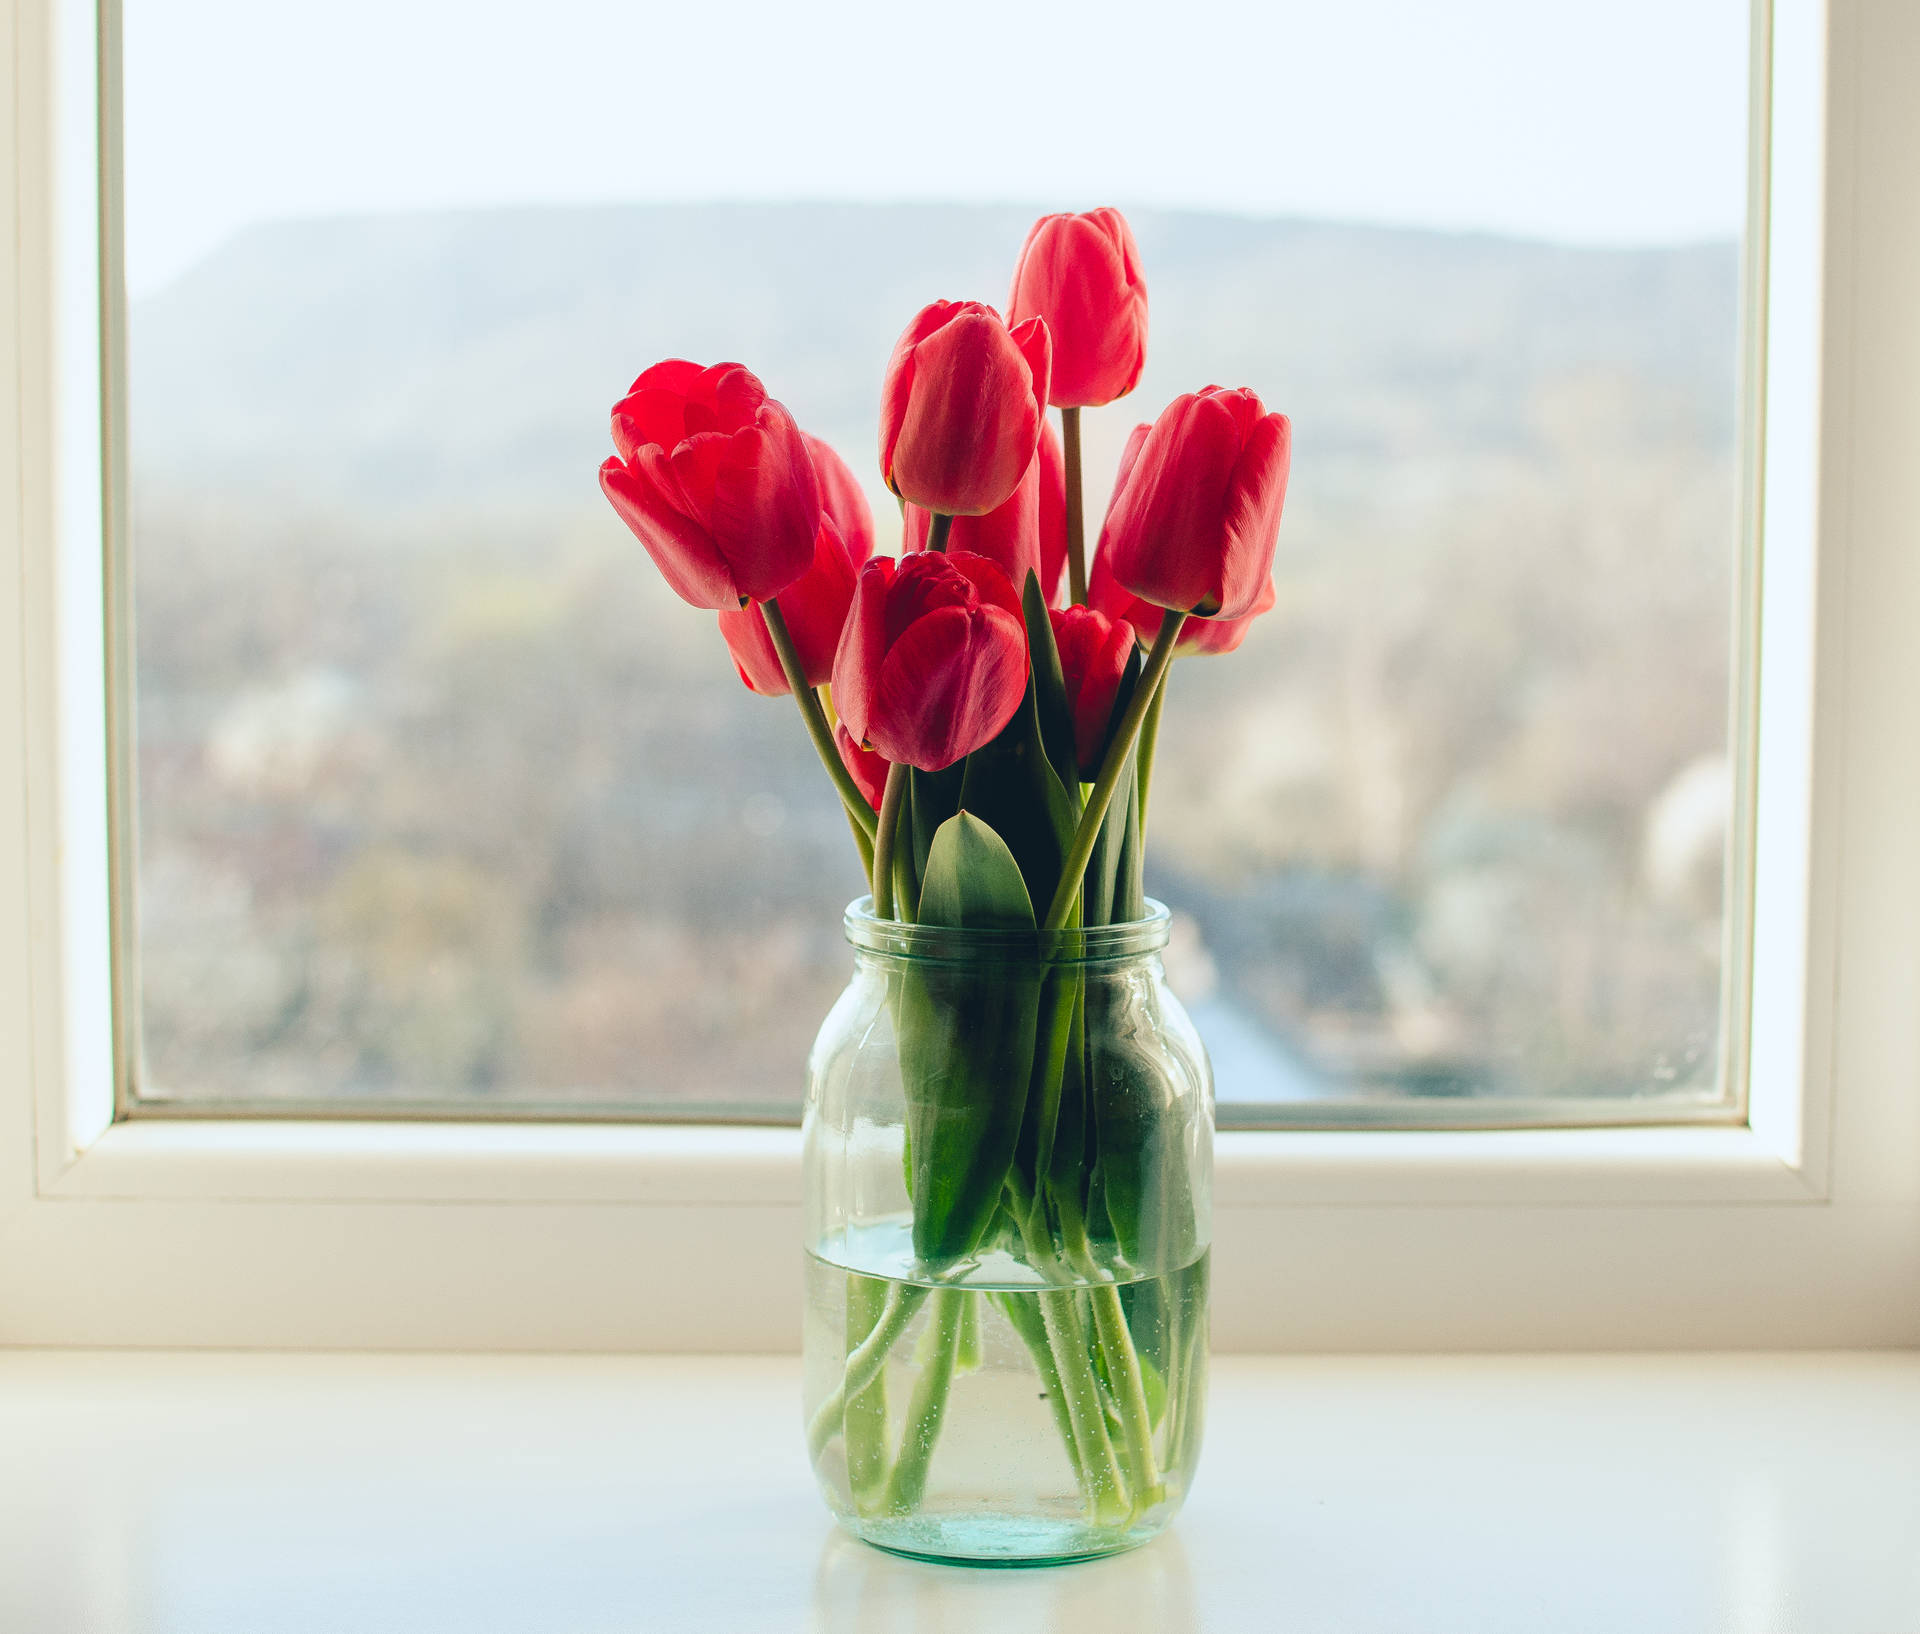 "Breathtaking Red Tulips By The Window" Wallpaper